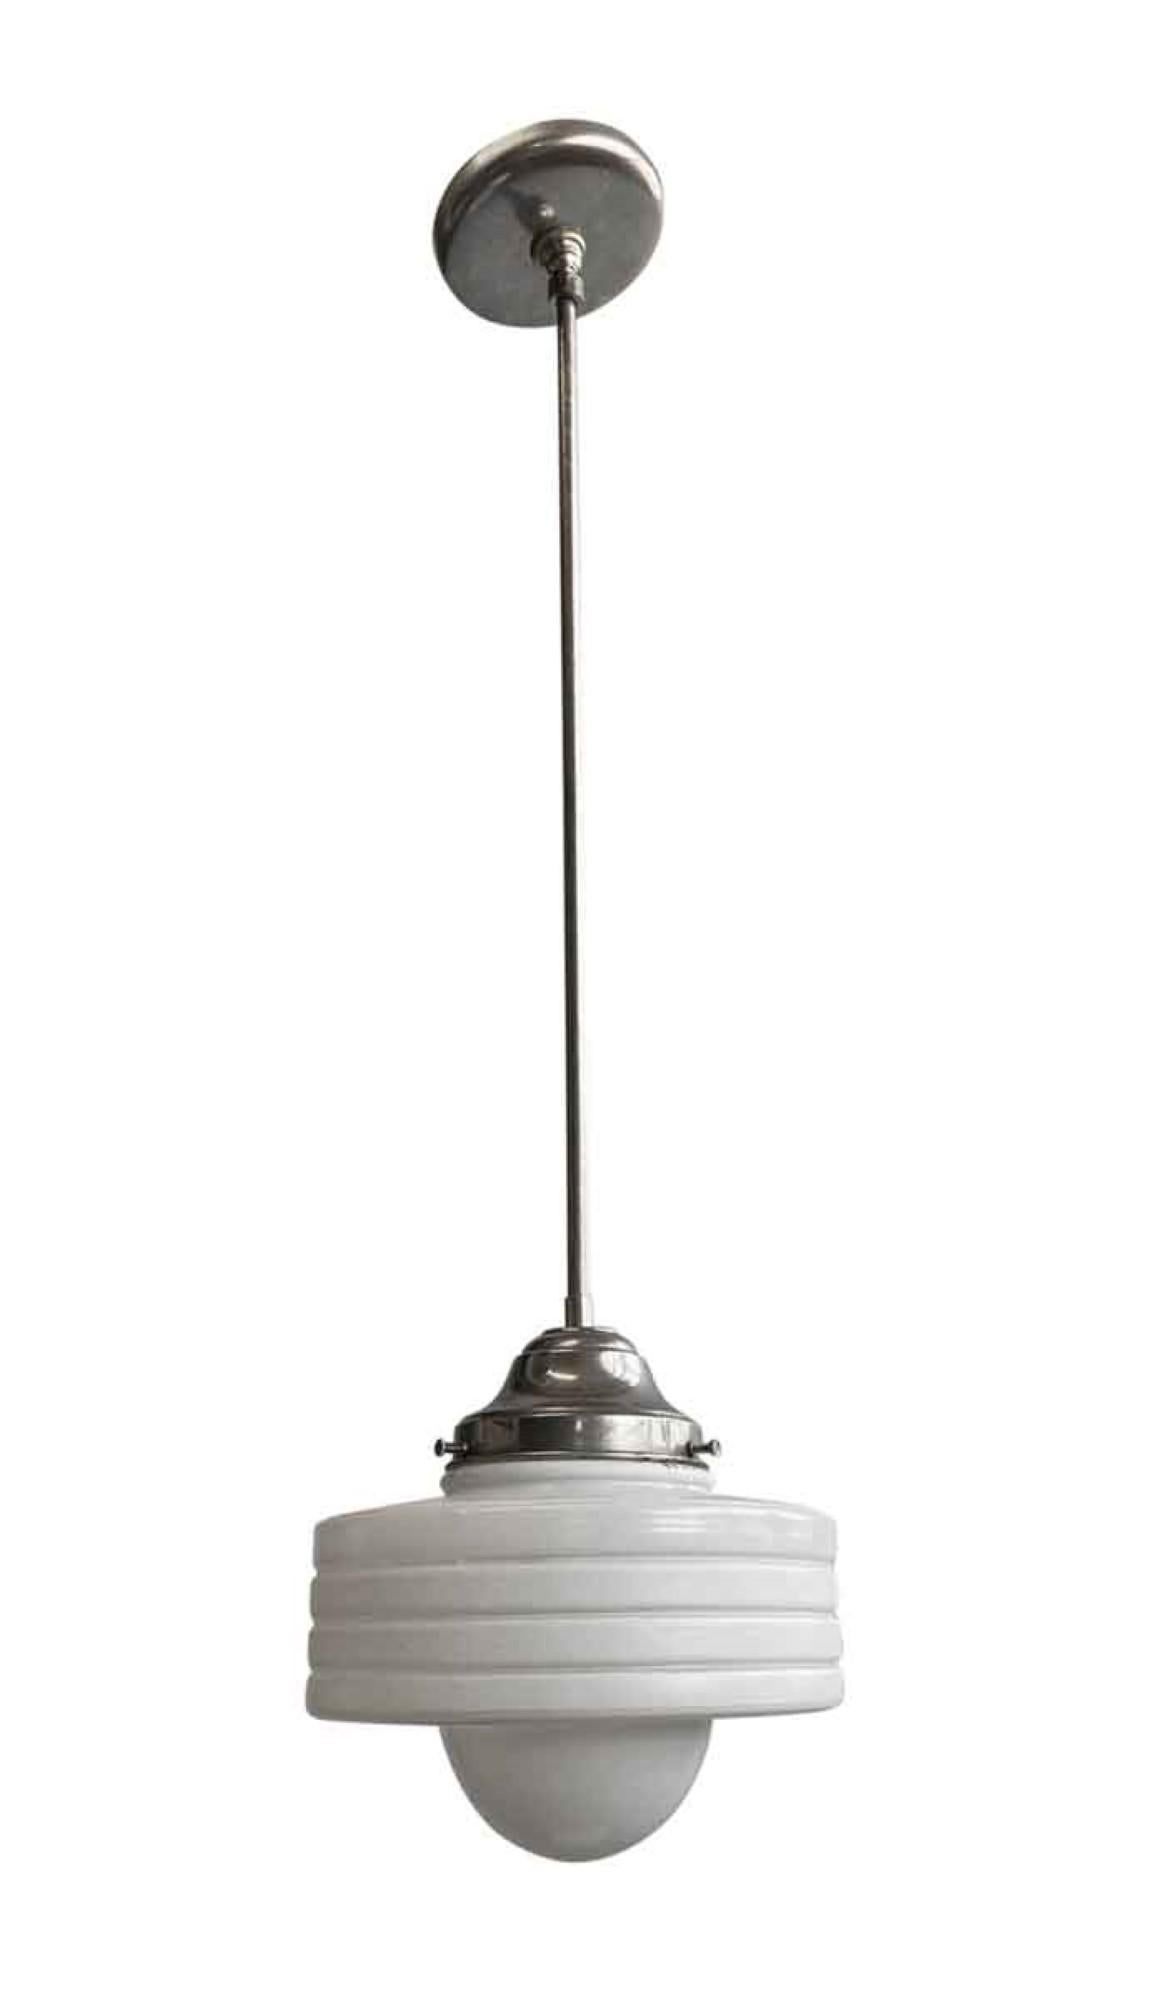 1950s white cast glass light globe with concentric circles with brushed steel finished fitter. Can be viewed as Art Deco or Streamline Moderne style. This can be seen at our 400 Gilligan St location in Scranton. PA.